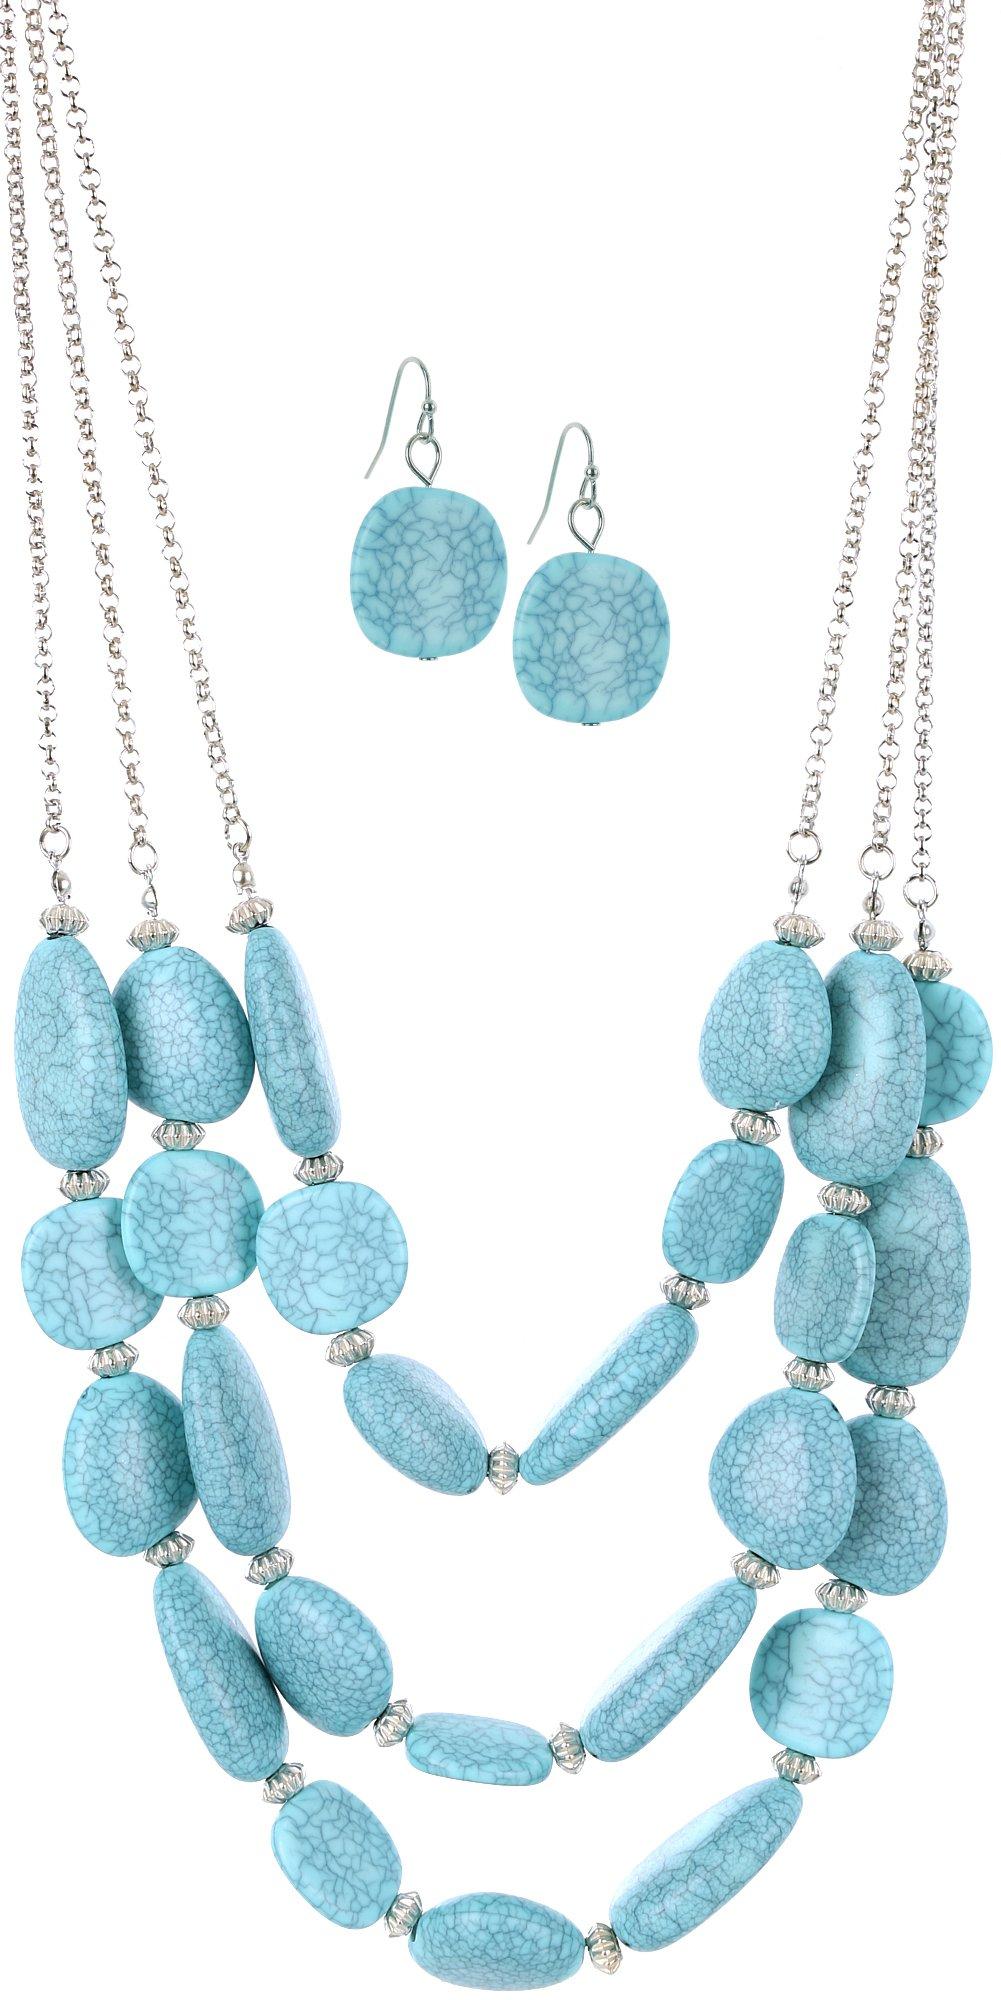 2-Pc. Faux Turquoise Bead Earrings & Necklace